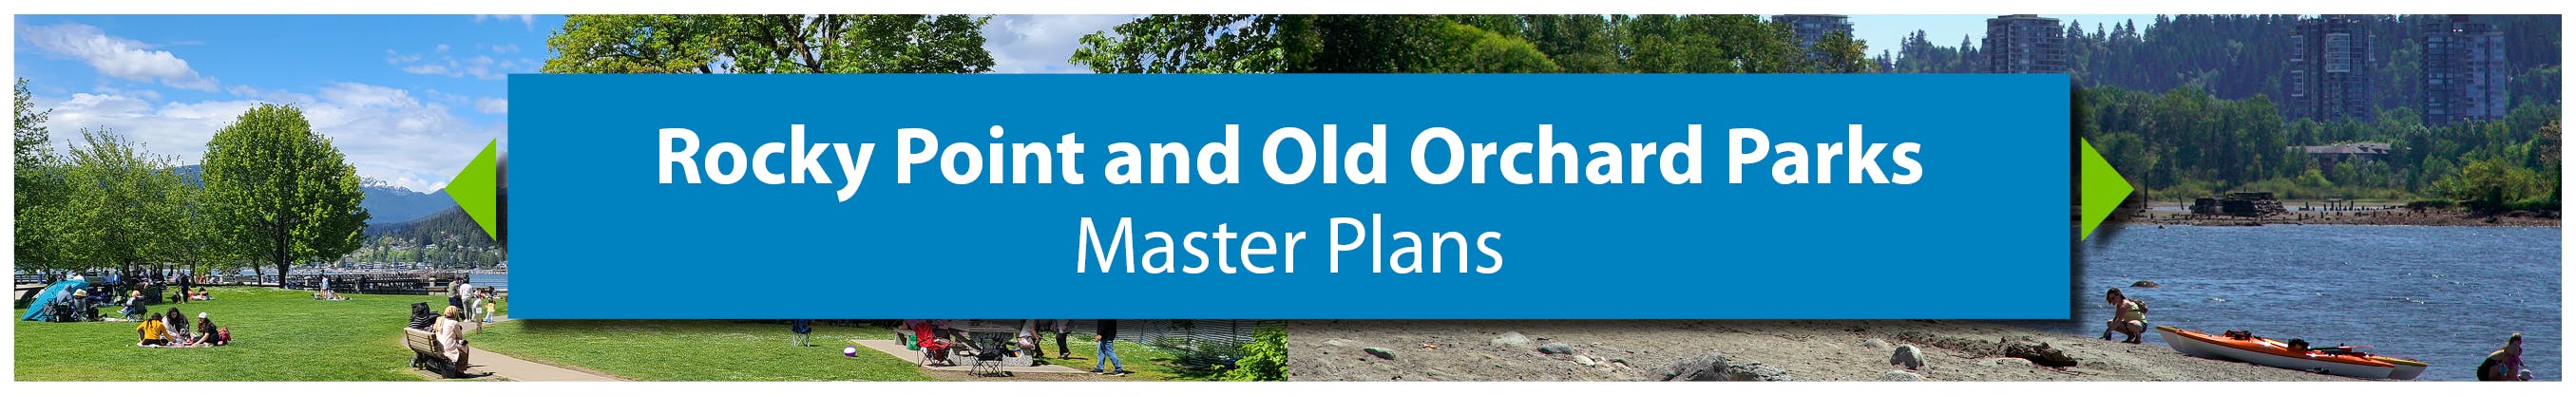 Rocky Point and Old Orchard Parks Master Plans